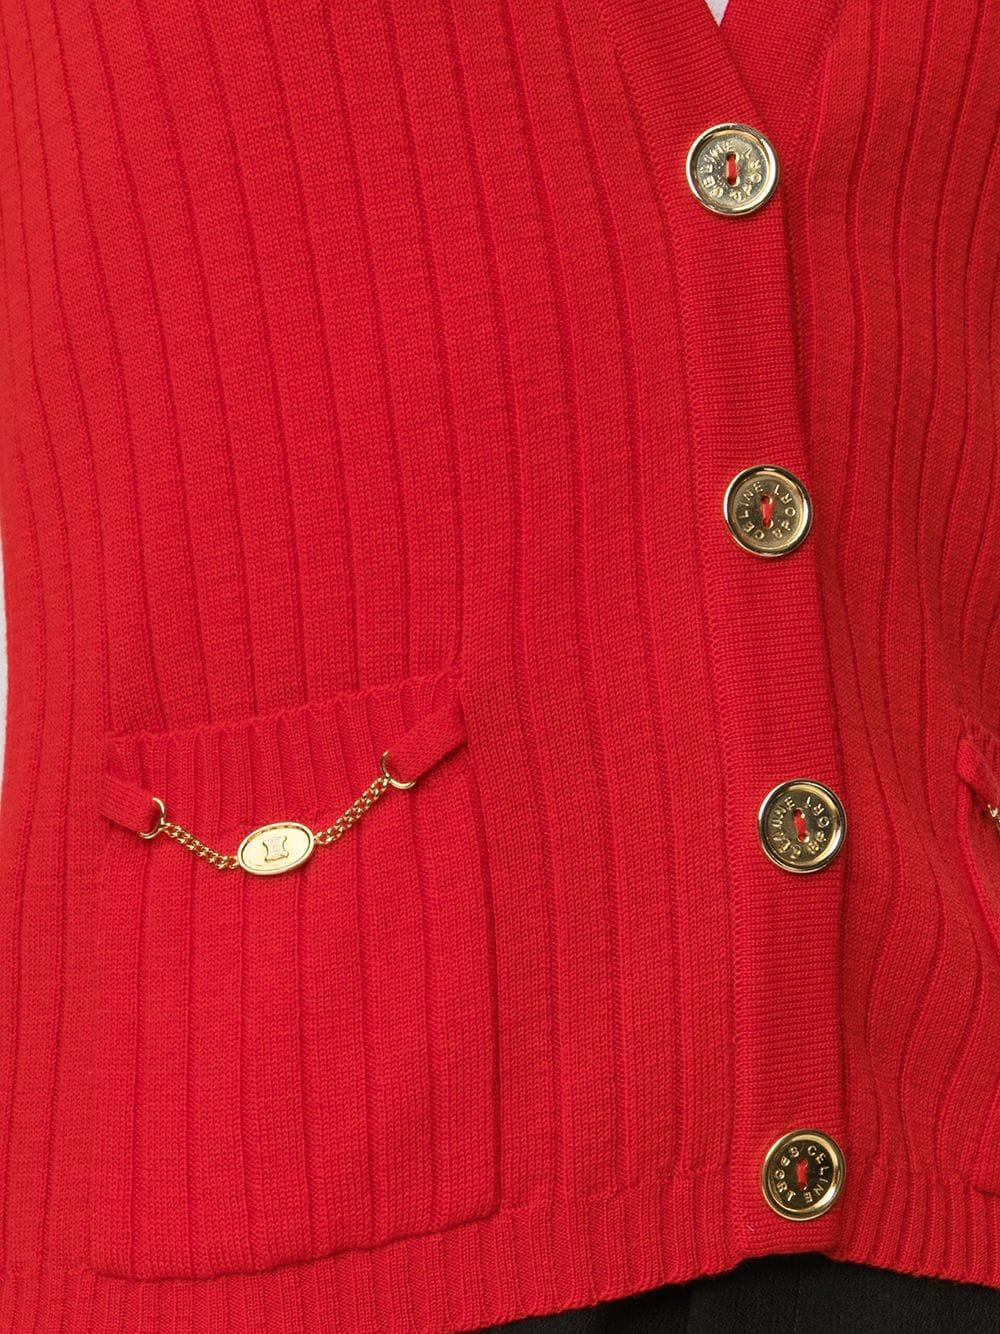 Céline vintage red vest, with V-neck and double front pockets. Featuring gold-coloured engraved buttons, (the internal replacement button is still present.) and small golden chains on the pockets.	

Colour: Red/ Gold	

Composition: 100%